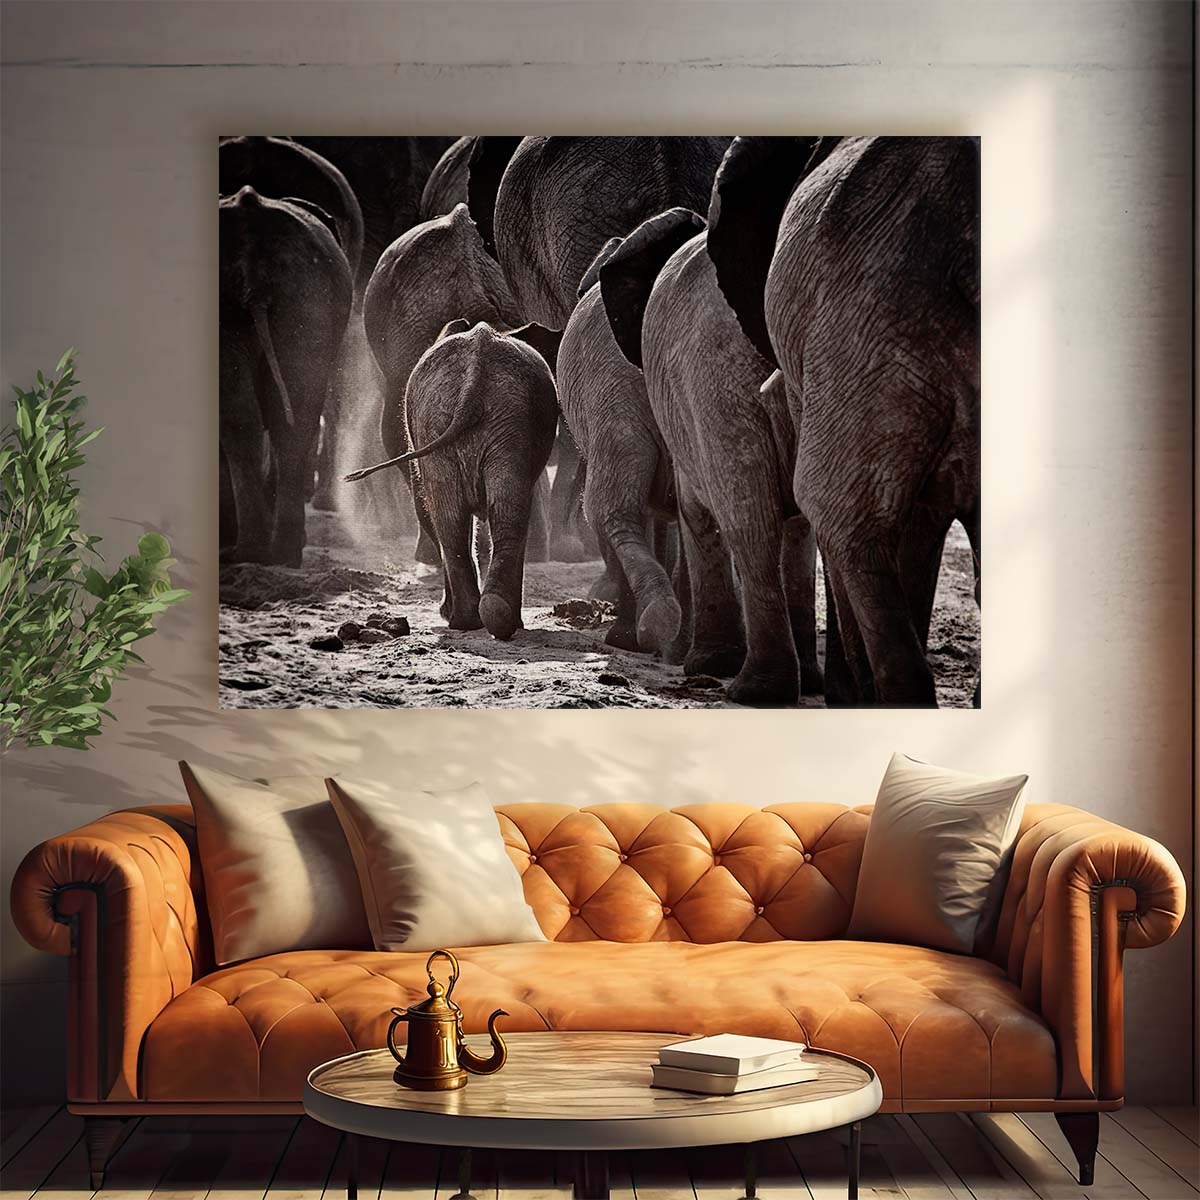 Chobe National Park Elephant Herd Wall Art by Luxuriance Designs. Made in USA.